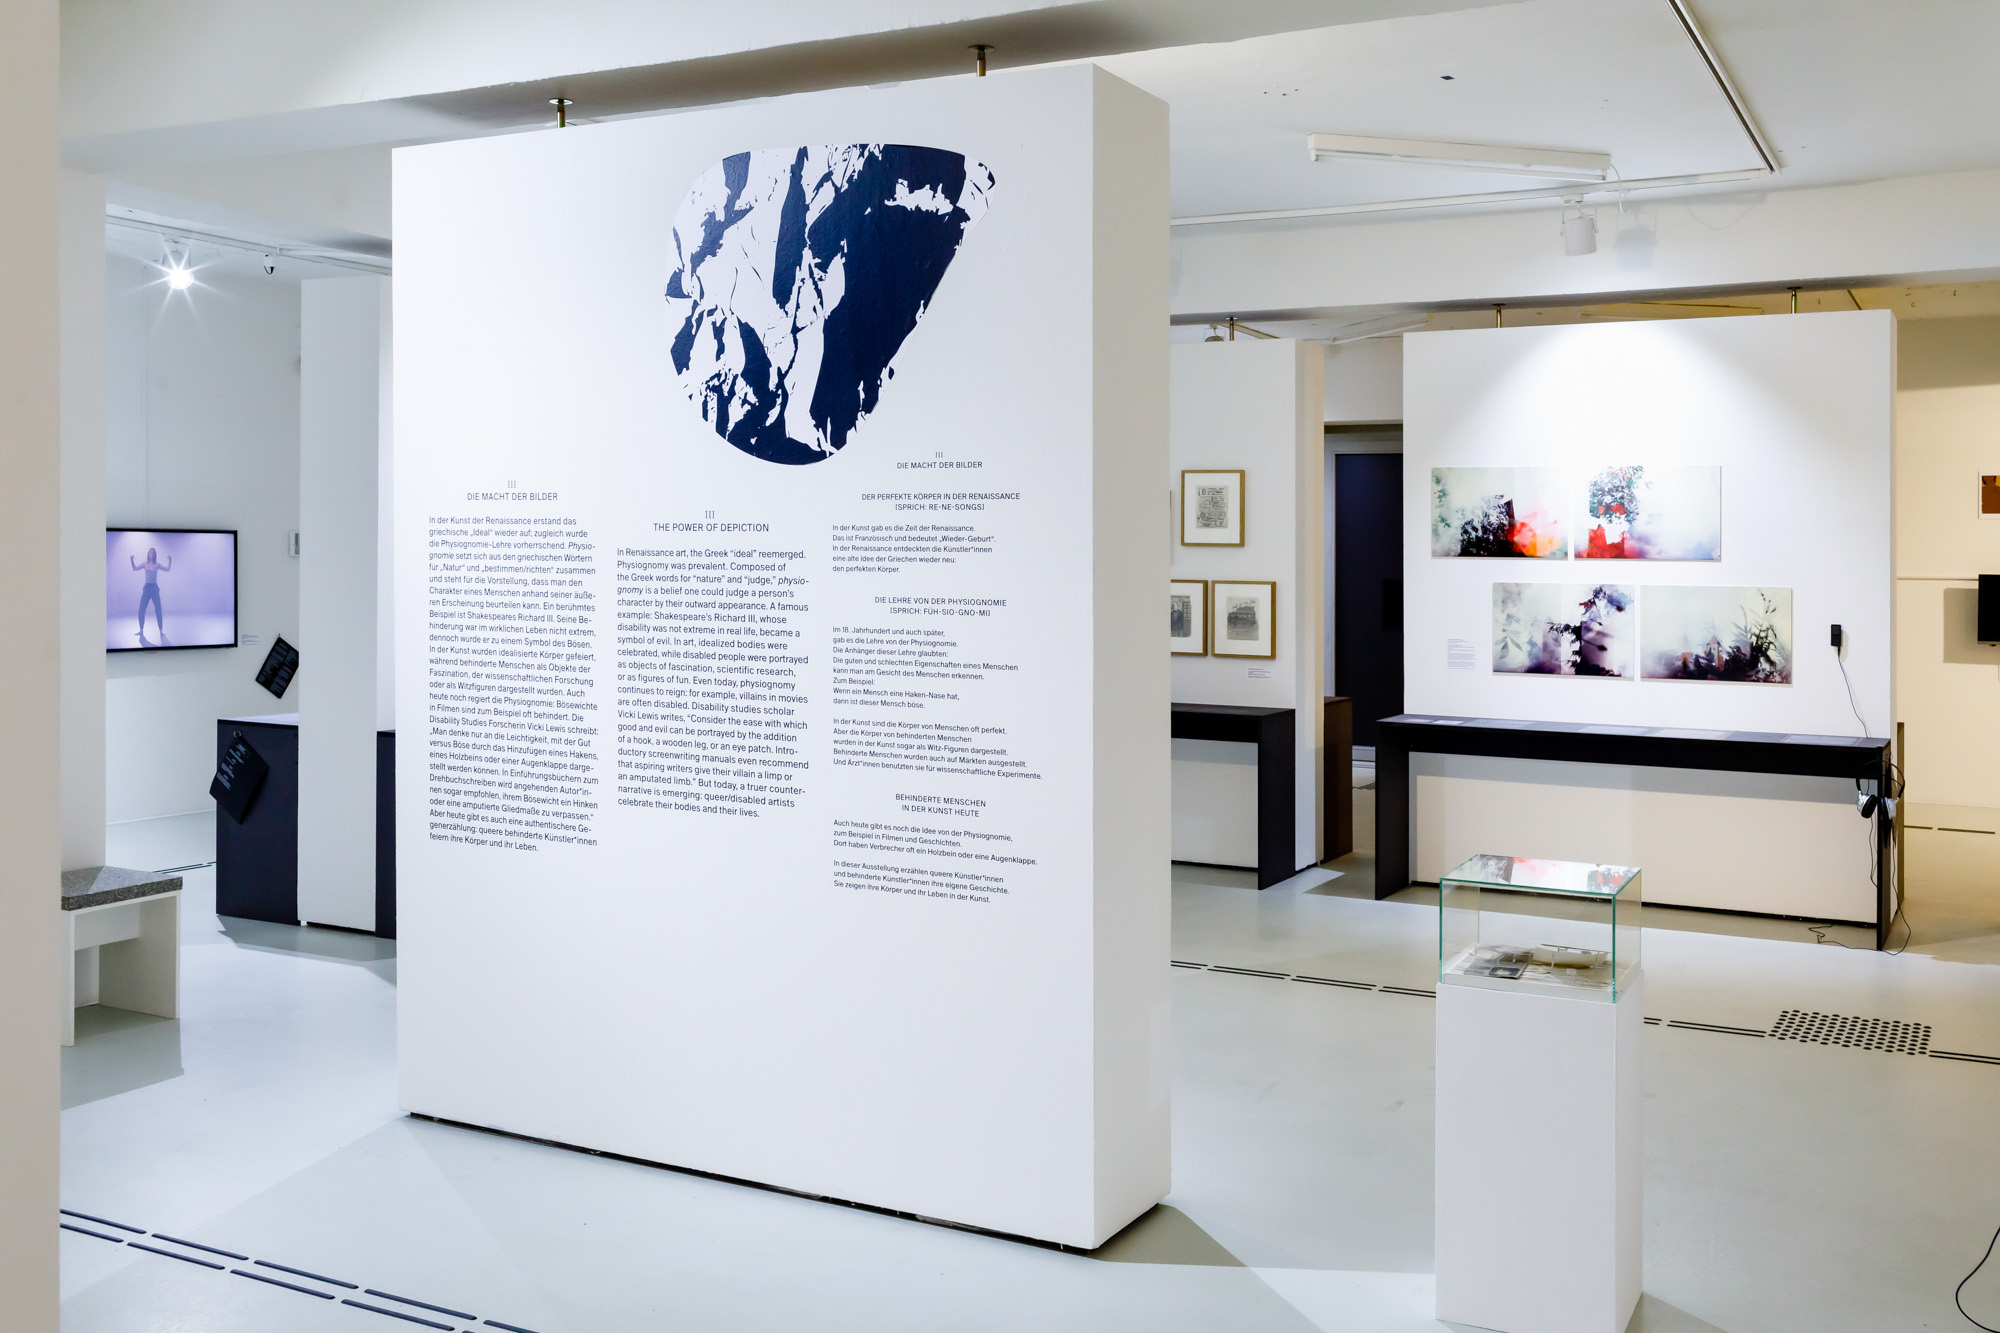 Photograph of an art exhibition with an information stand prominently featured